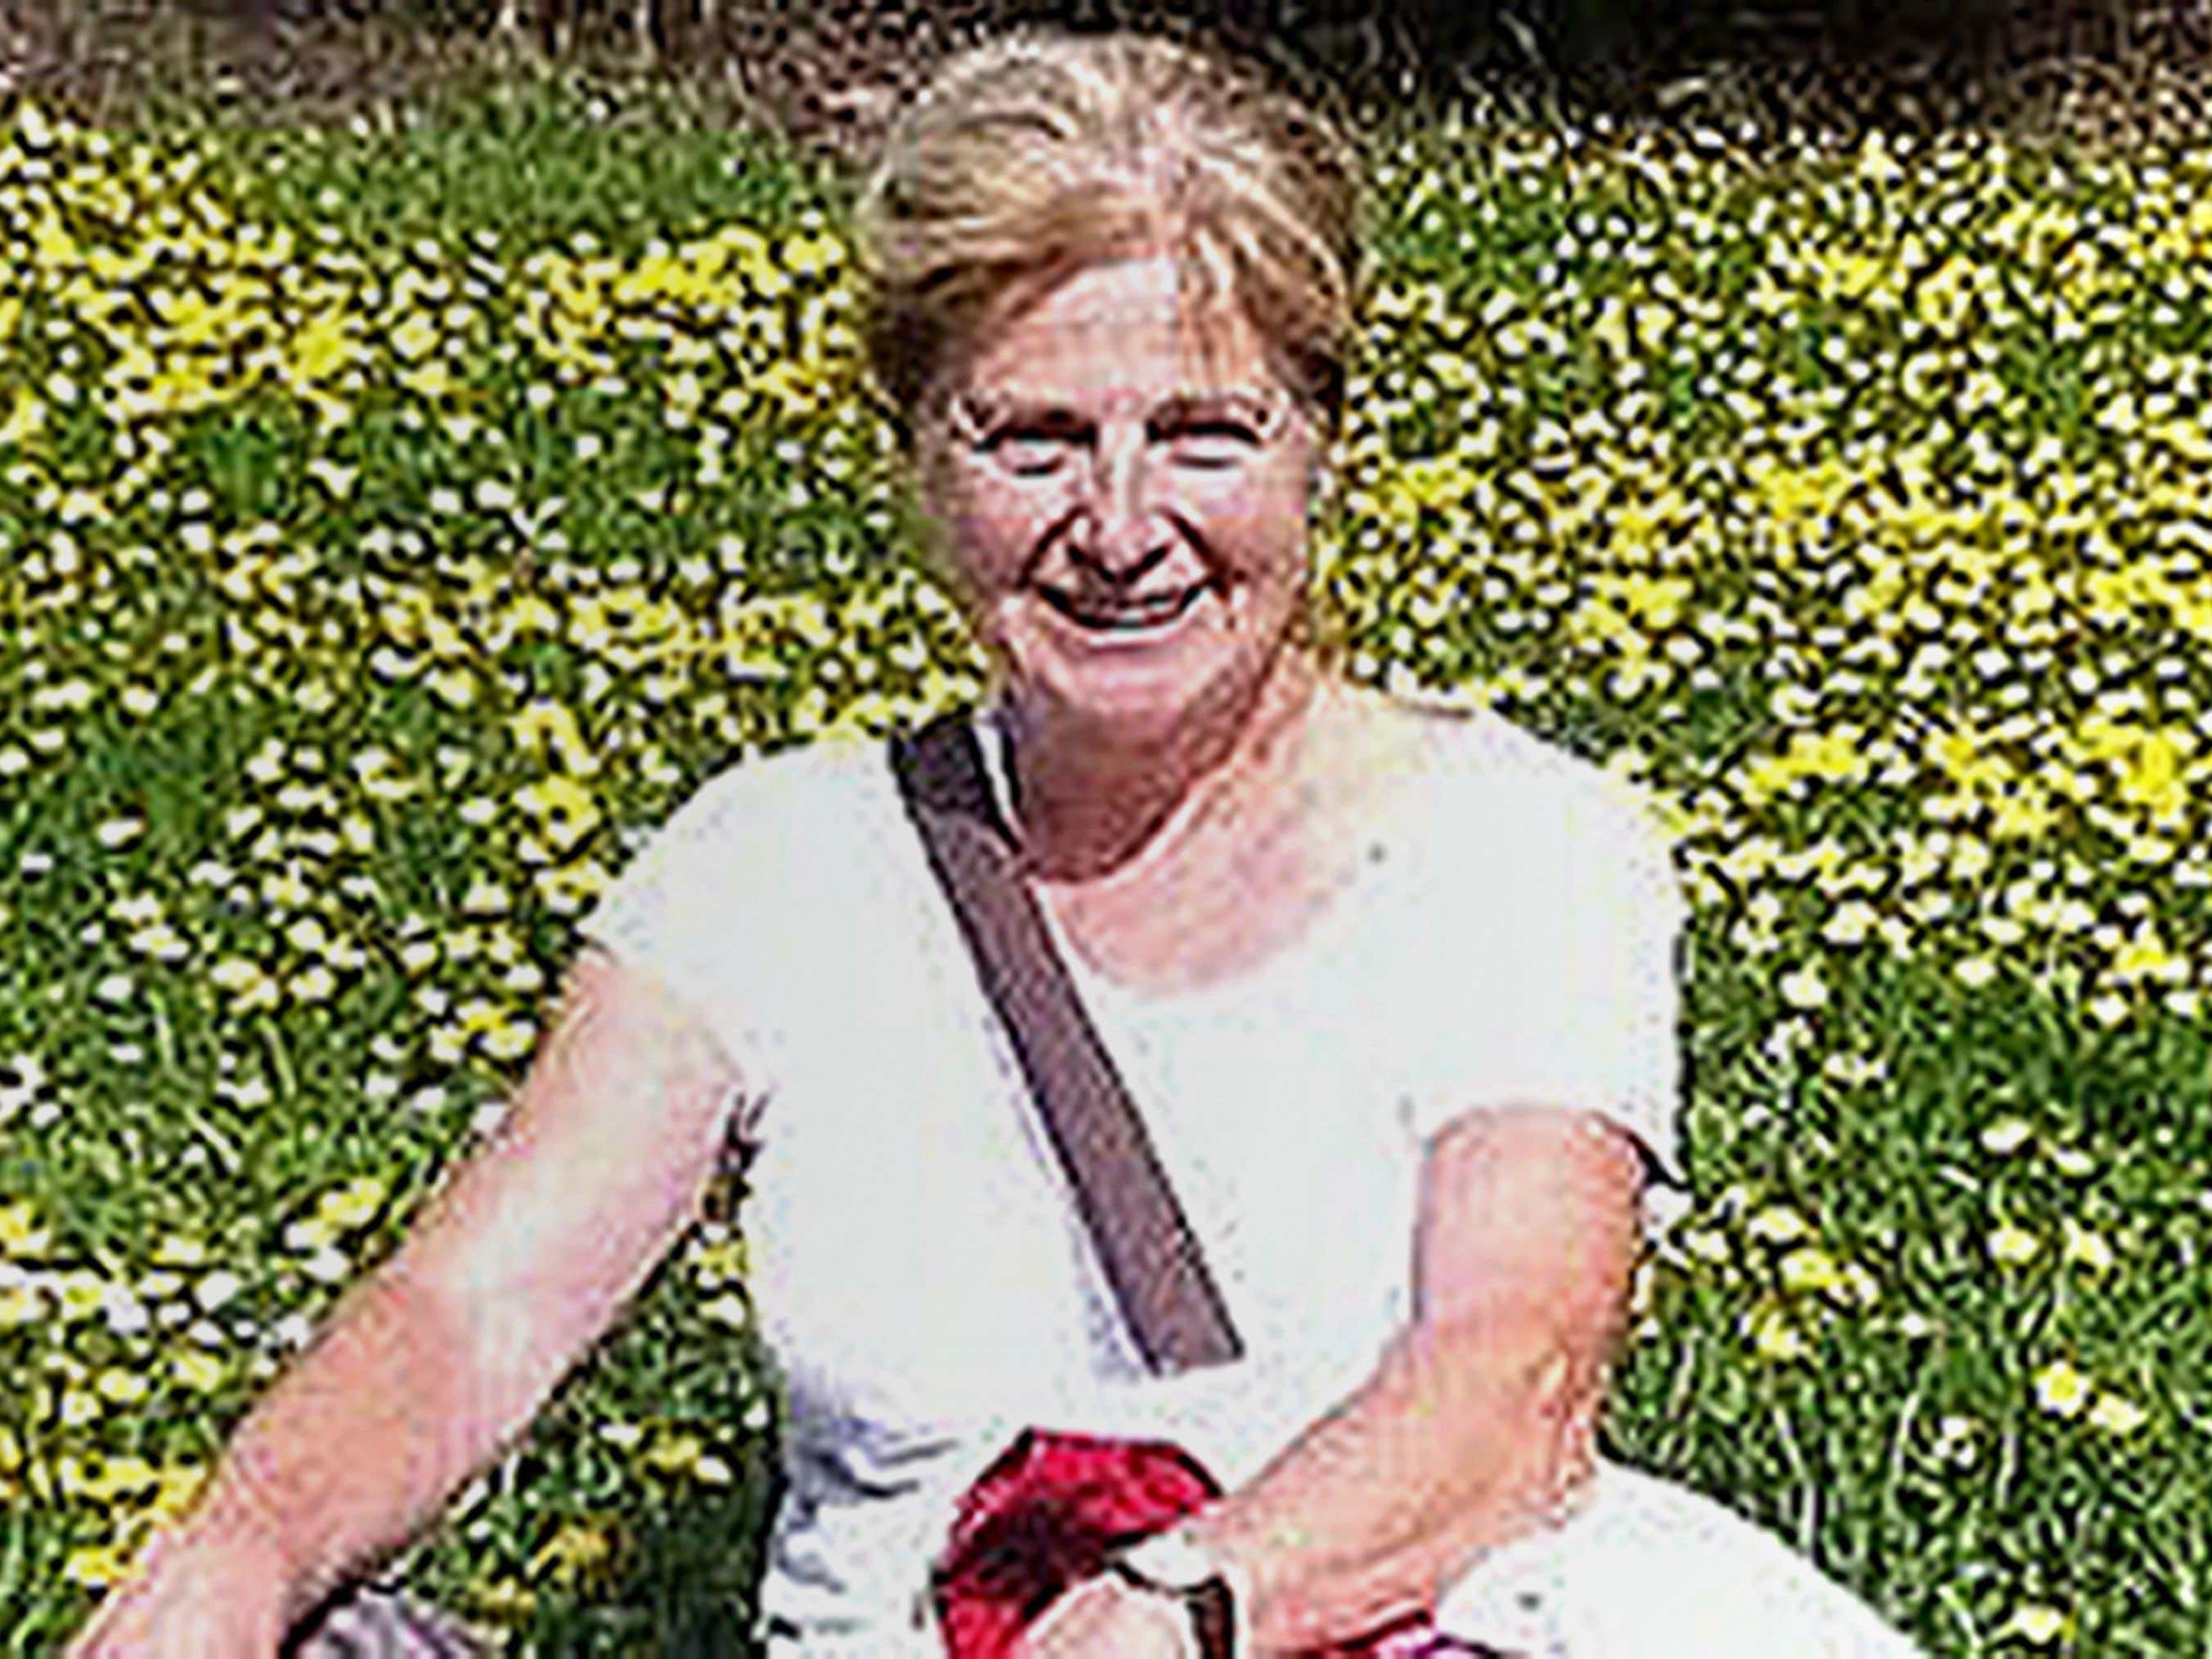 Diabetic woman ‘howling’ and ‘delirious’ before death at workshop, court told